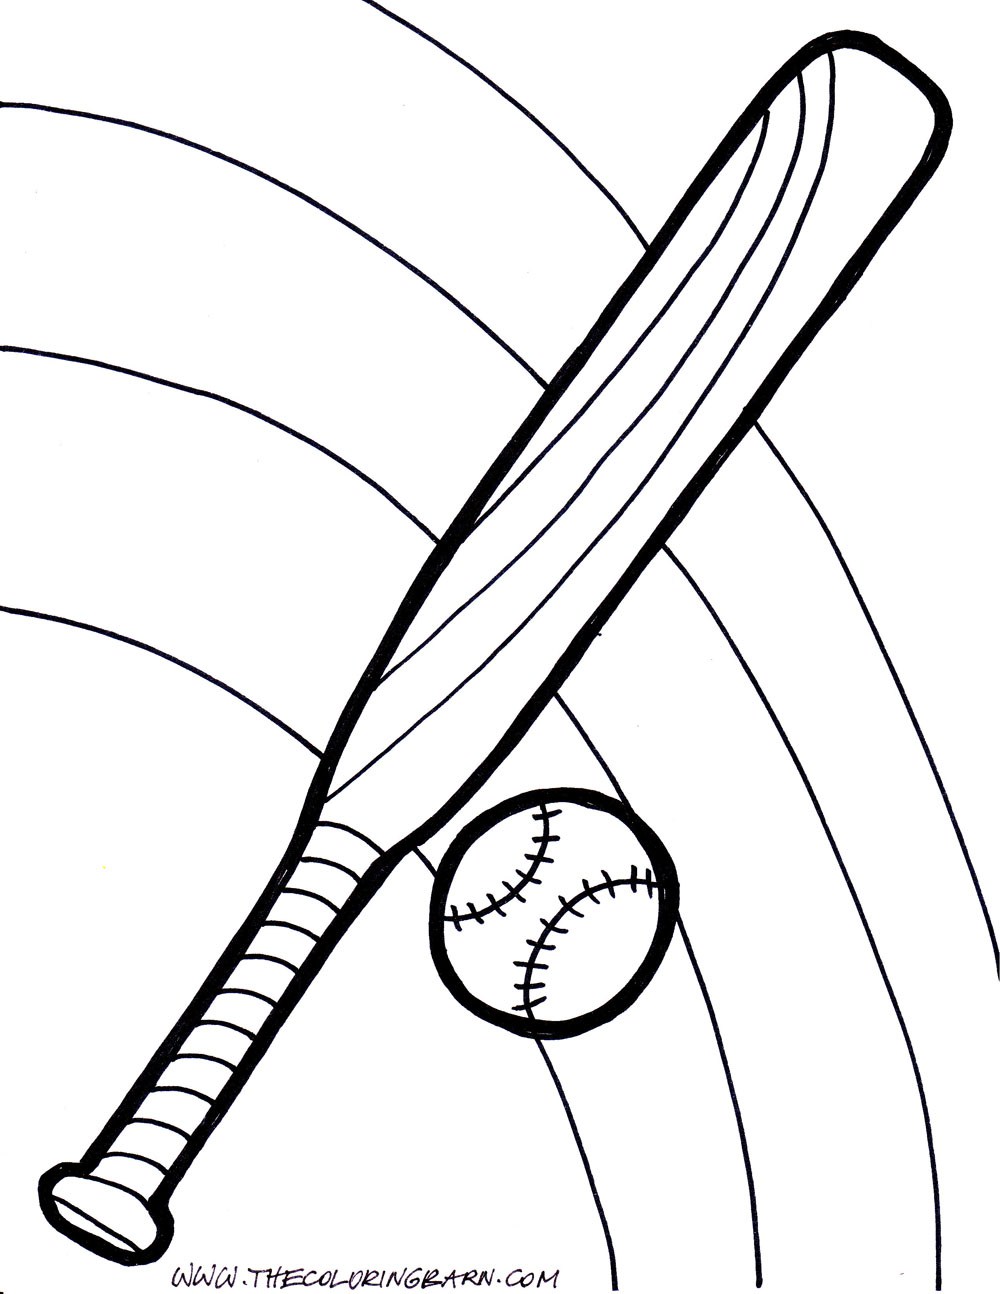 Baseball Bat Coloring Pages. print this coloring page it